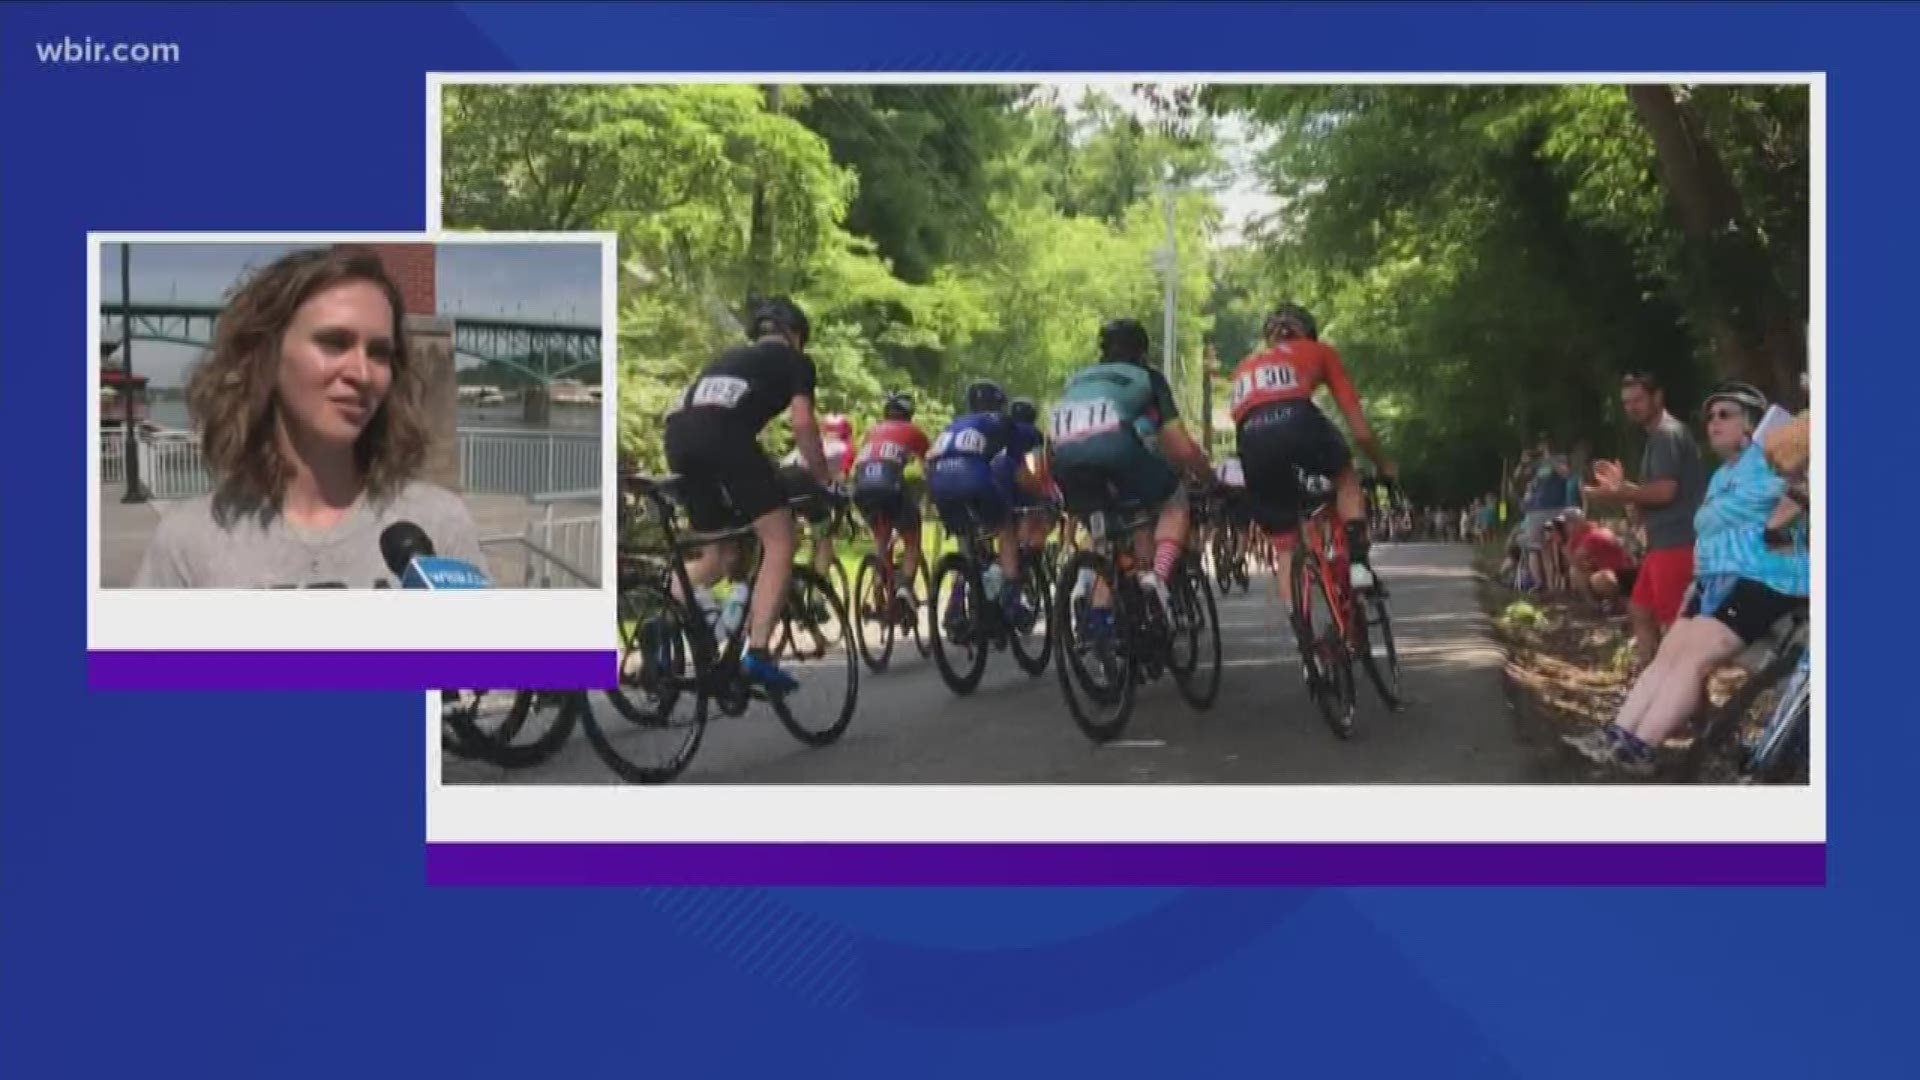 The USA Cycling road national championships is in Knoxville. Time trials start June 27. New this year: the Para-cycling competition. There will be periodic road closures throughout the weekend to accomodate the different race courses. Go to visitknoxville.org for more information. June 26, 2019-4pm